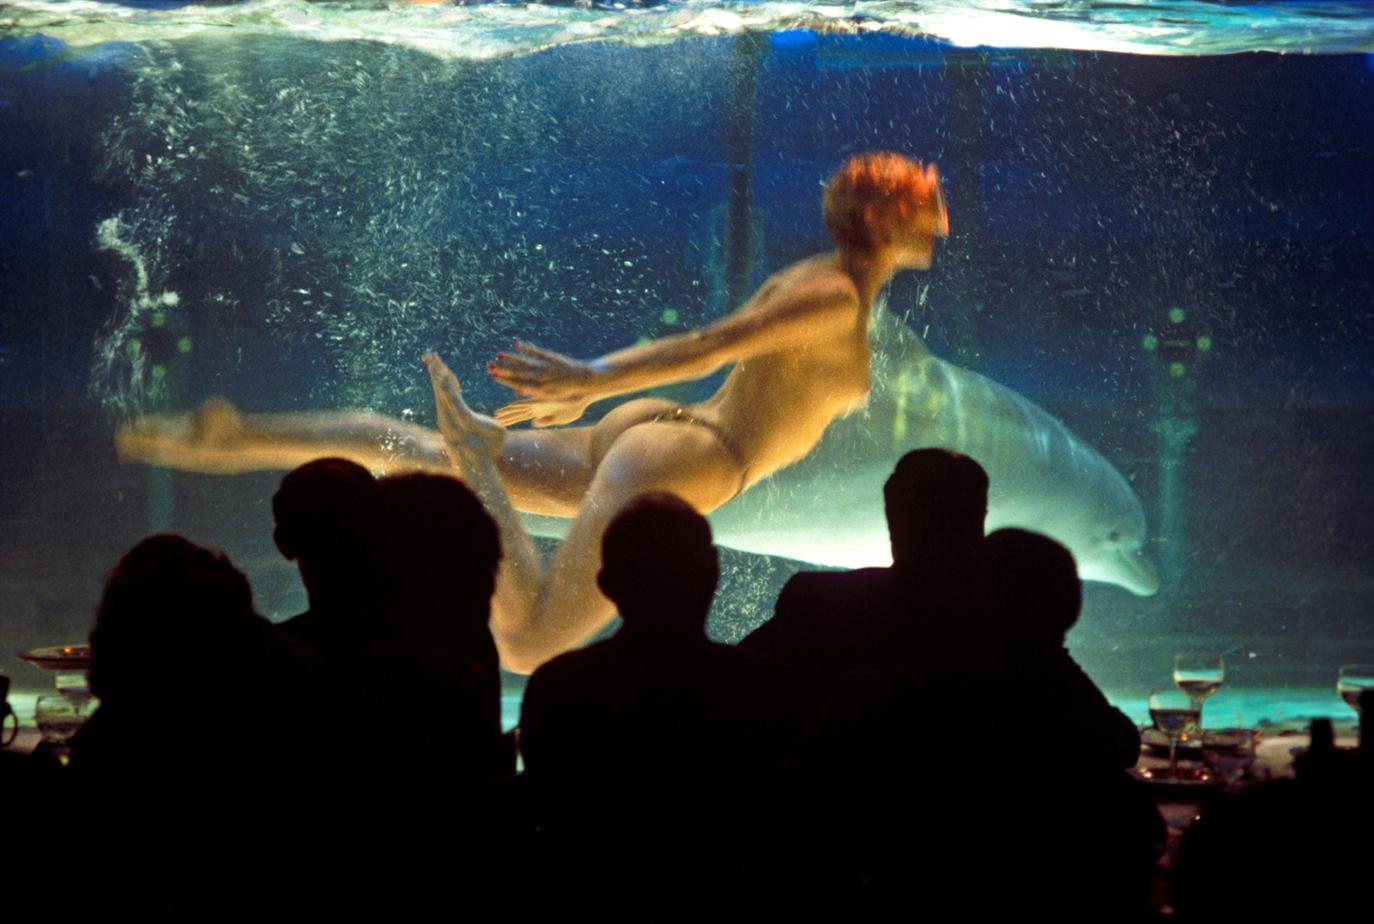 Moulin Rouge Mermaid
by Alain Le Garsmeur

A performer at the Moulin Rouge Cabaret swims underwater with a dolphin in a tank, Clichy, Paris, France, 1979.

Paper size 20 x 24 inches / 51 x 61 cm
Printed in 2024 
Archival Pigment Print 
Signed and